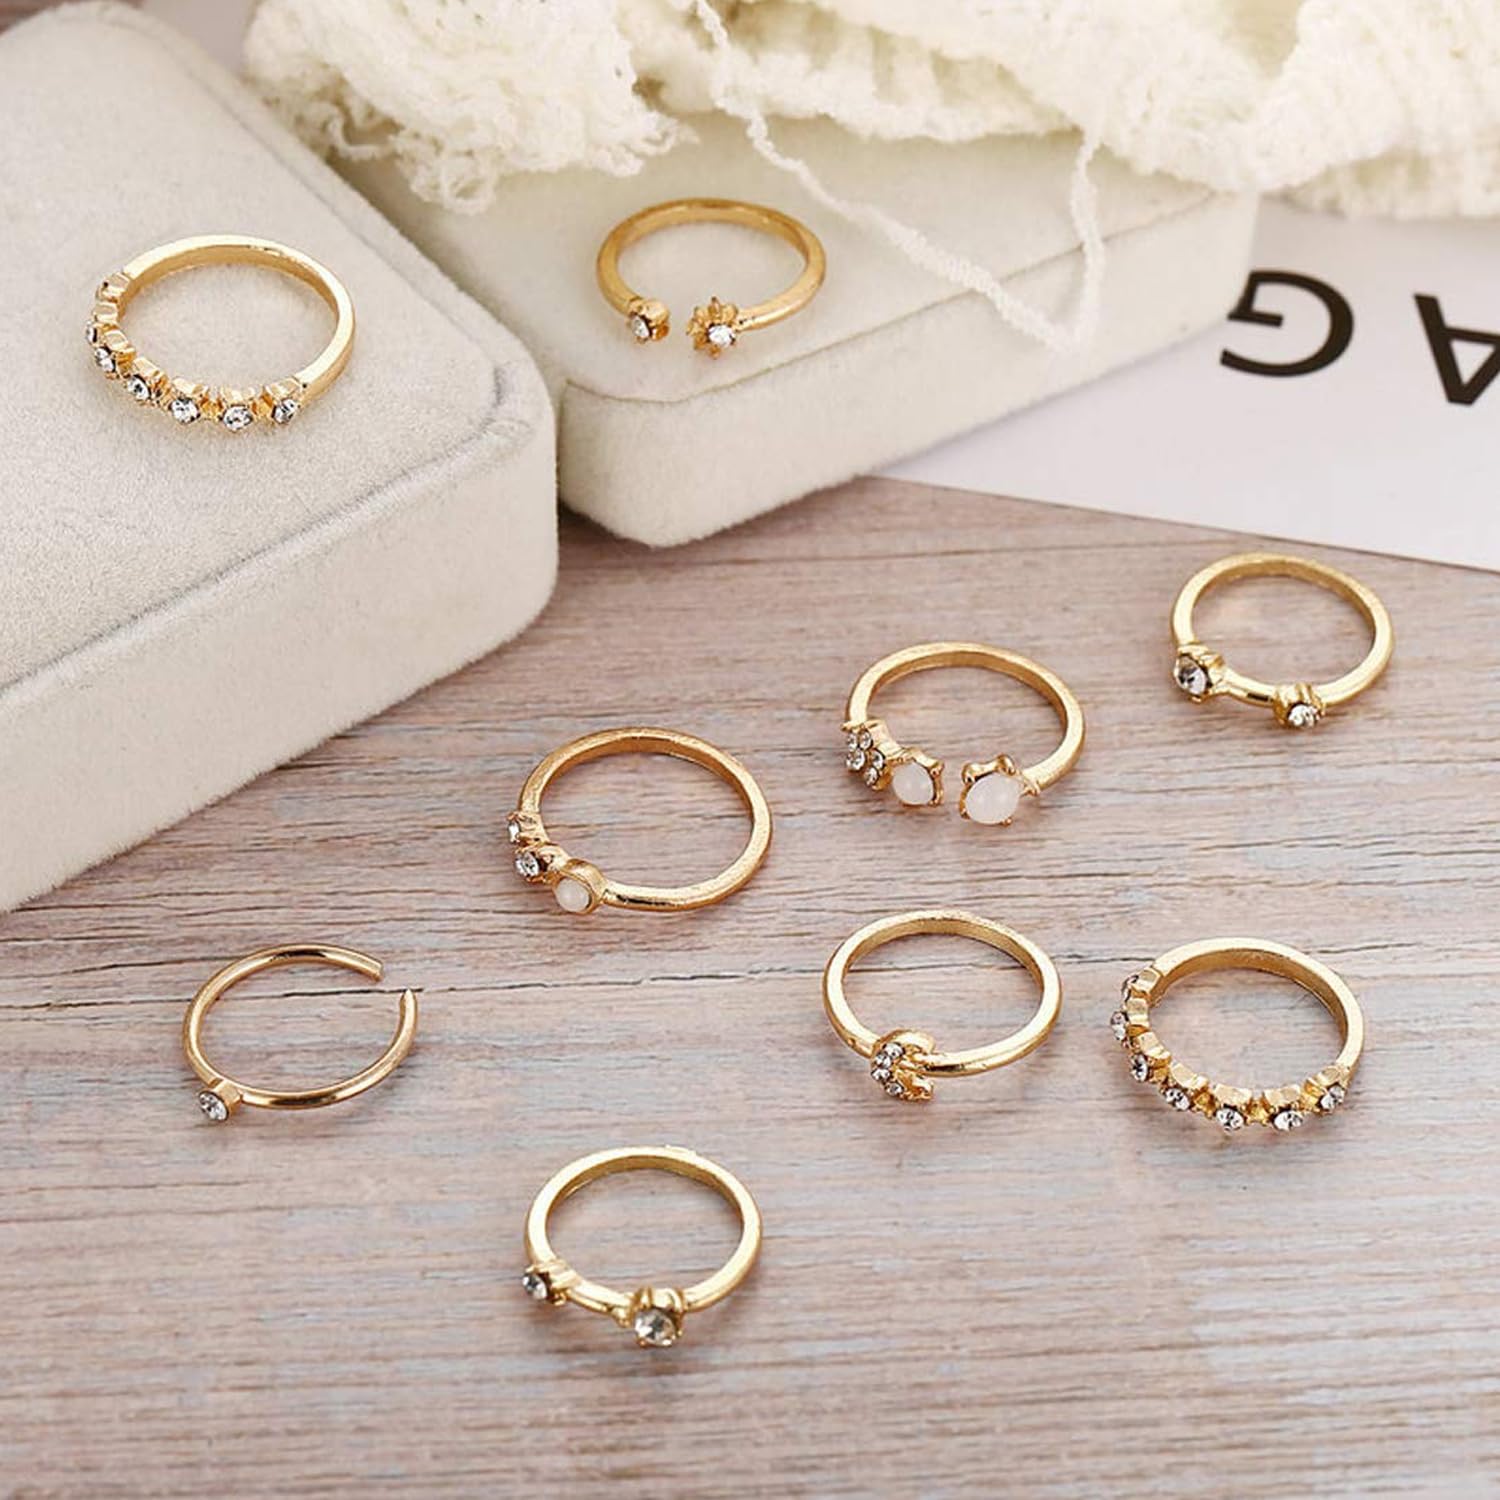 Yellow Chimes Rings for Women and Girls Aesthetic Stack Ring Set